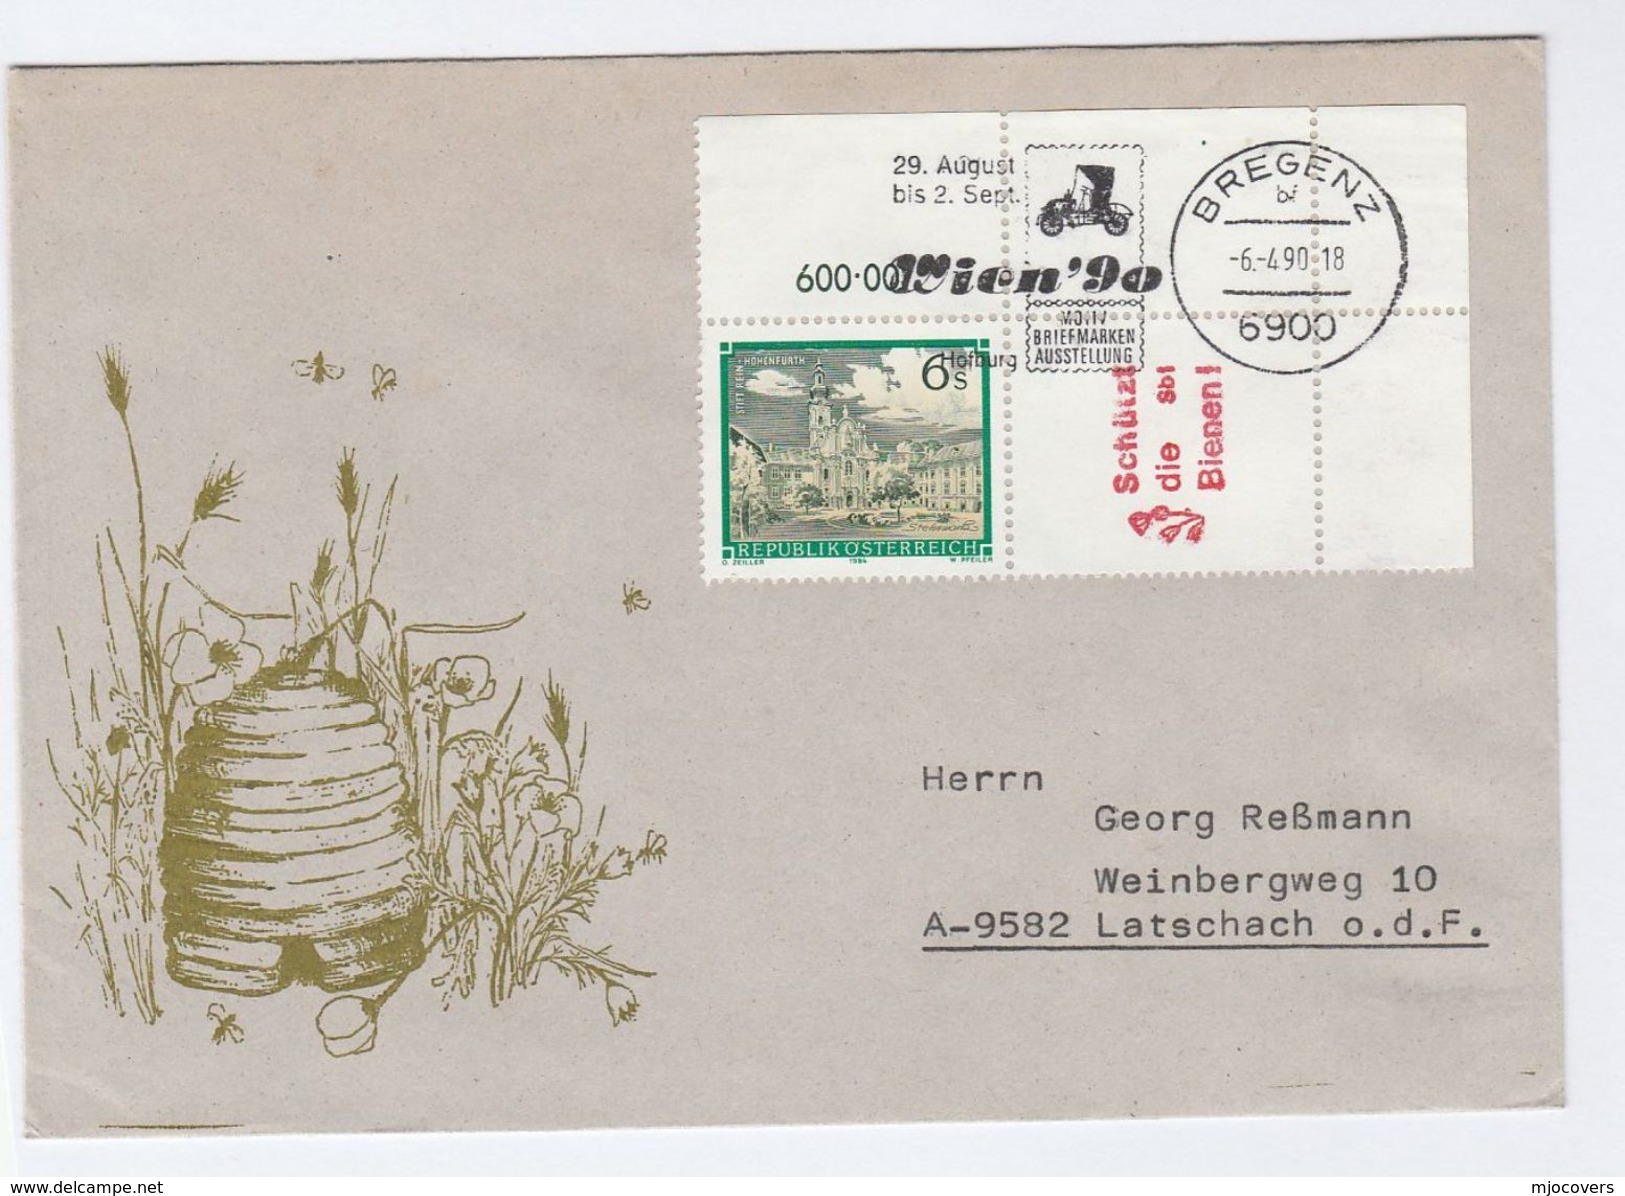 1990 AUSTRIA BEES Behive COVER Insect Stamps Bee - Honeybees